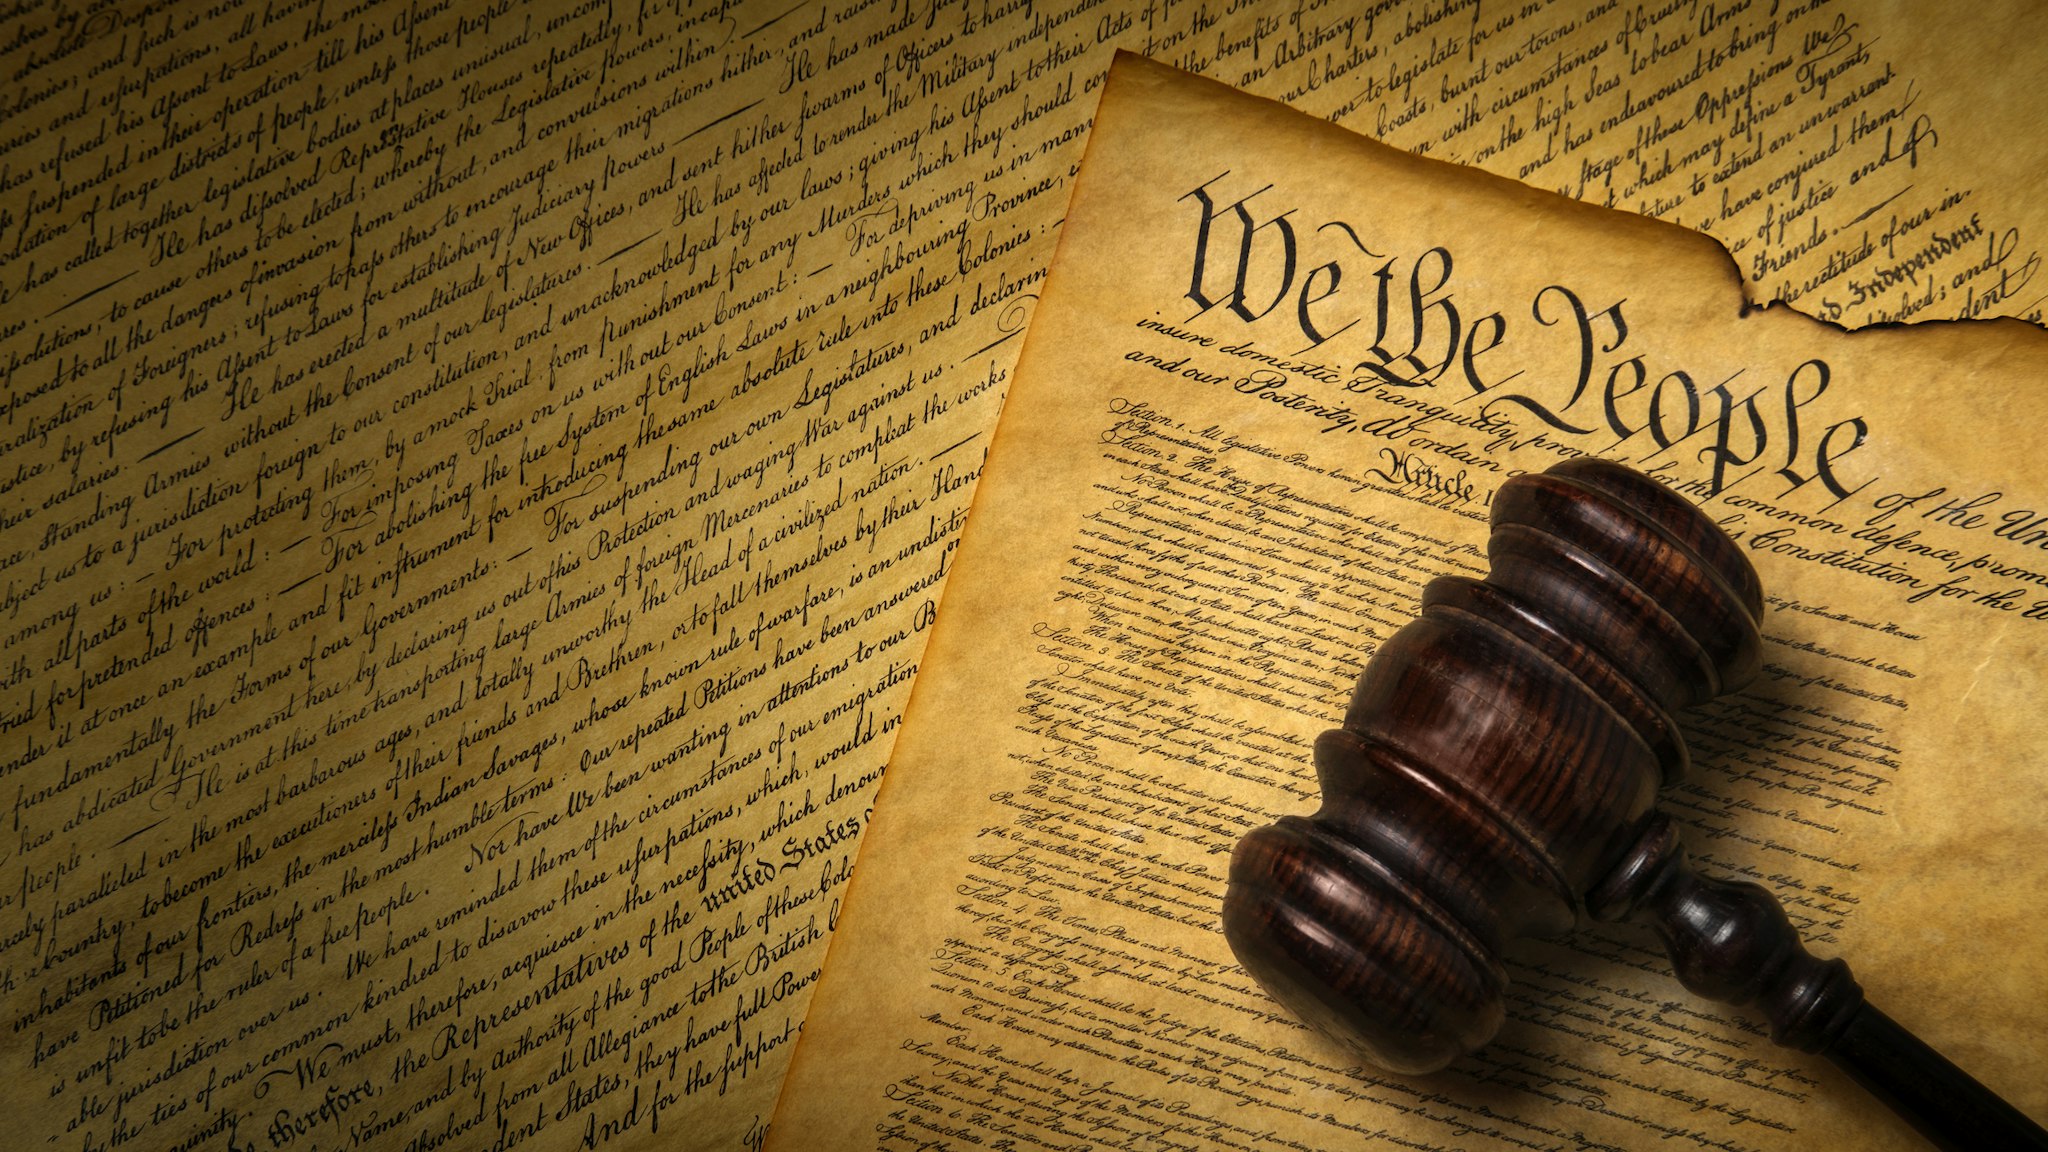 US Constitution with gavel - stock photo